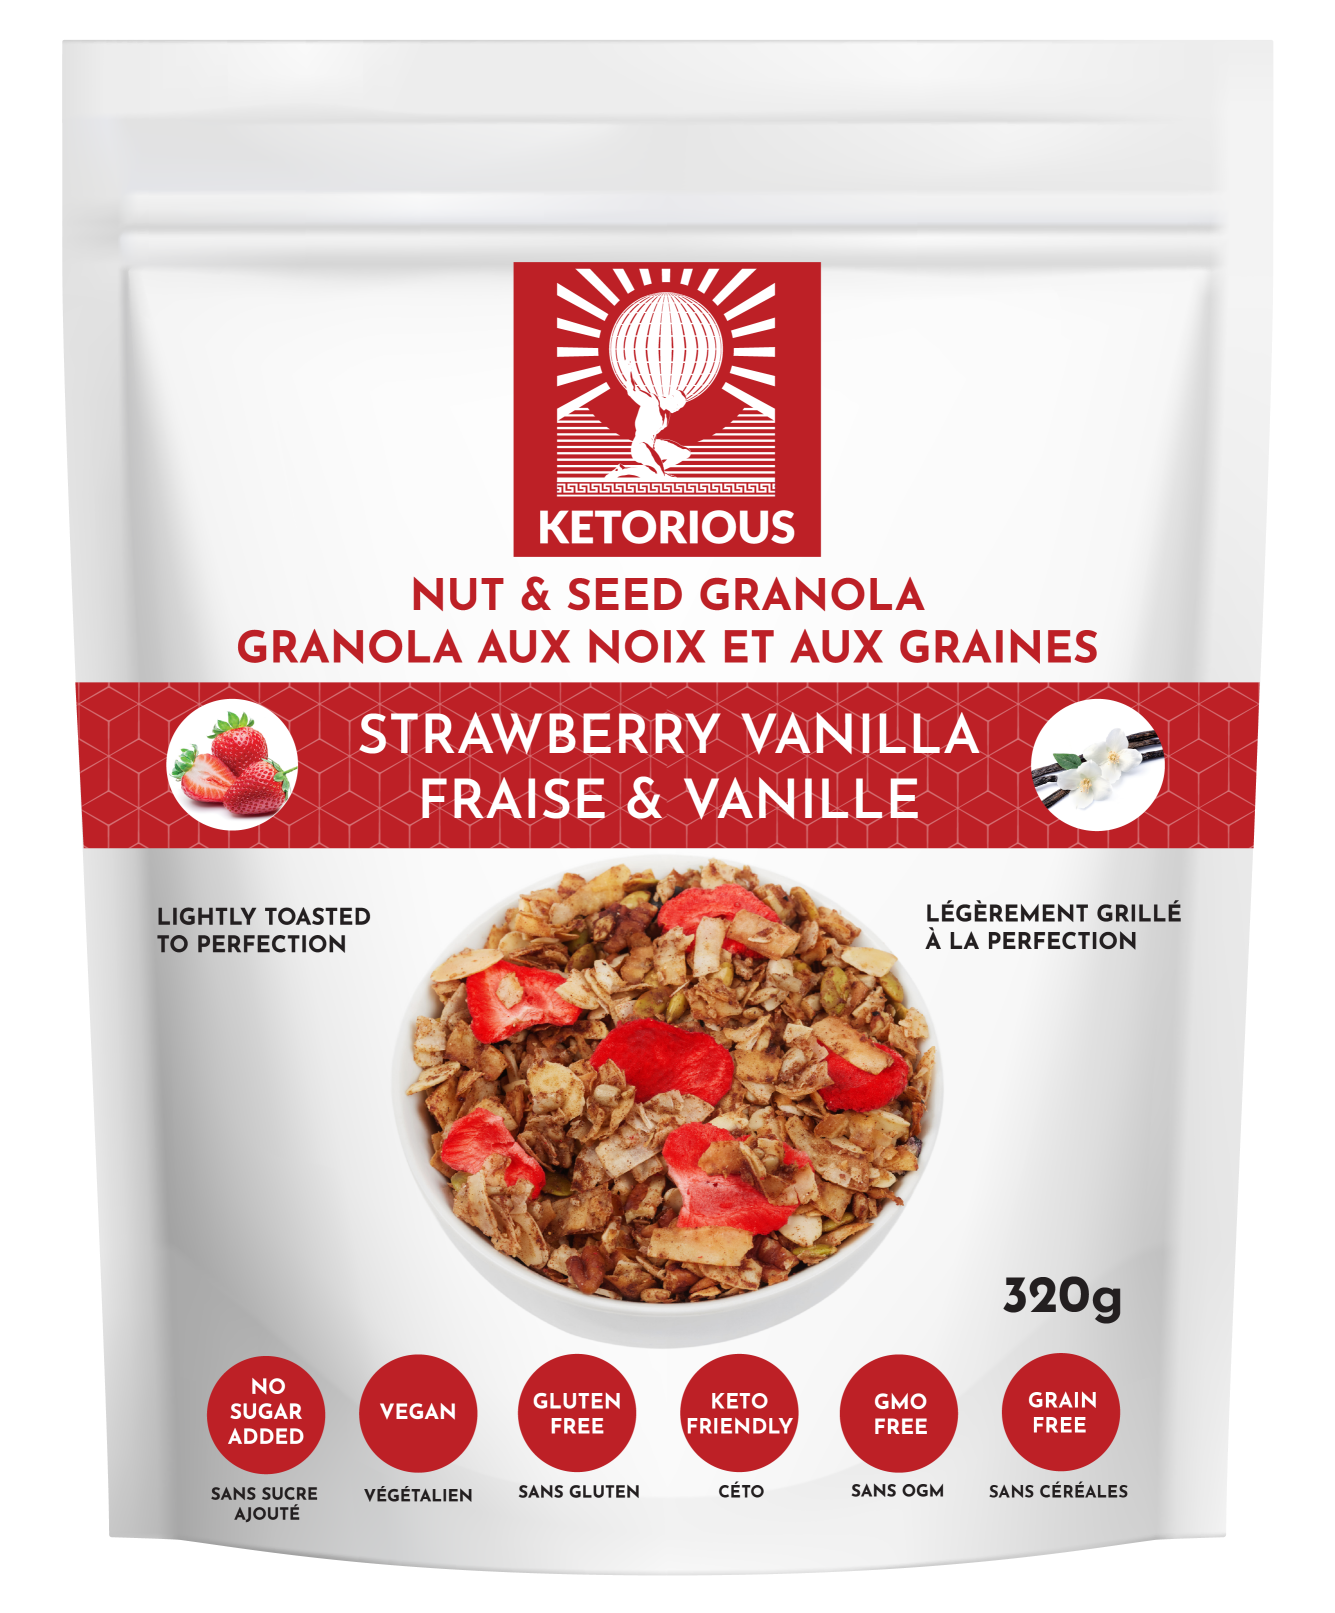 Strawberry Crunch Nut and Seed Granola by Ketorious, 320g (Copy) (Copy)